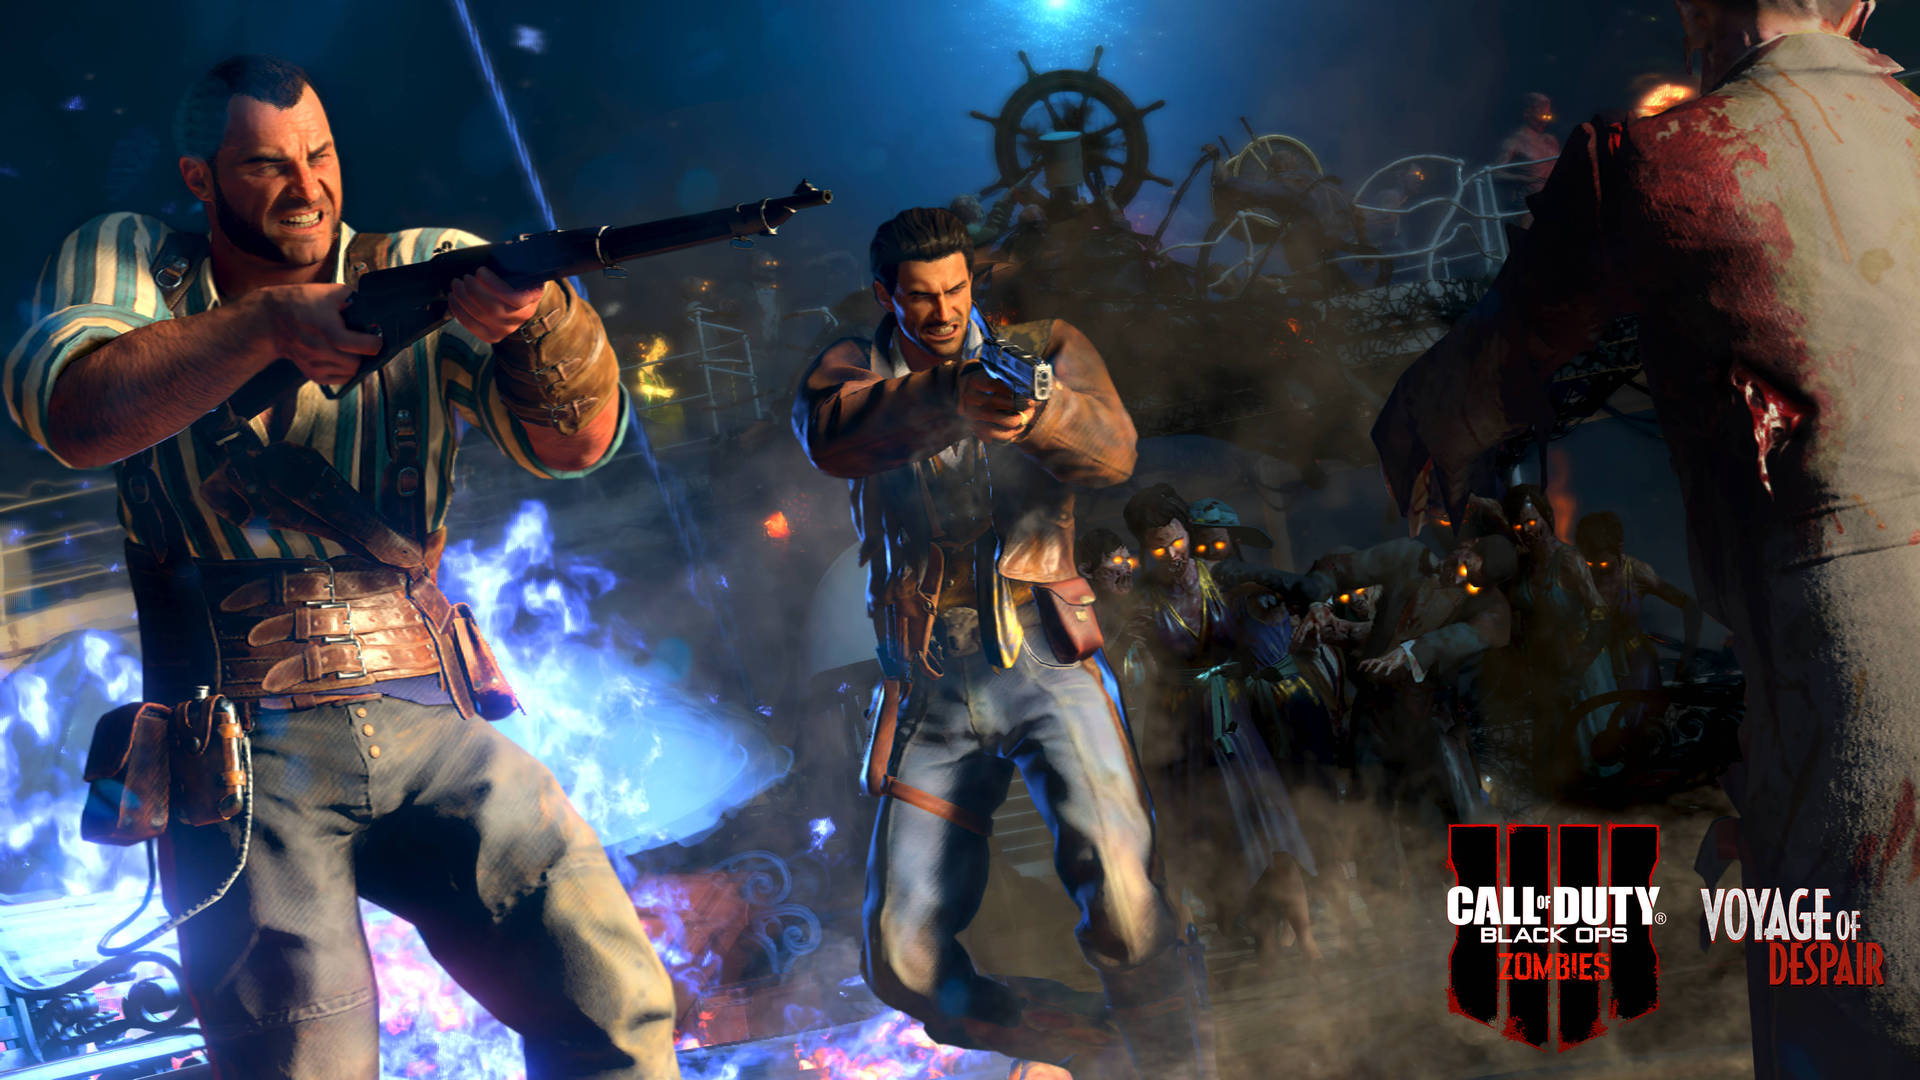 Take on the hordes of Undead in Call of Duty: Black Ops 4 Zombies Wallpaper